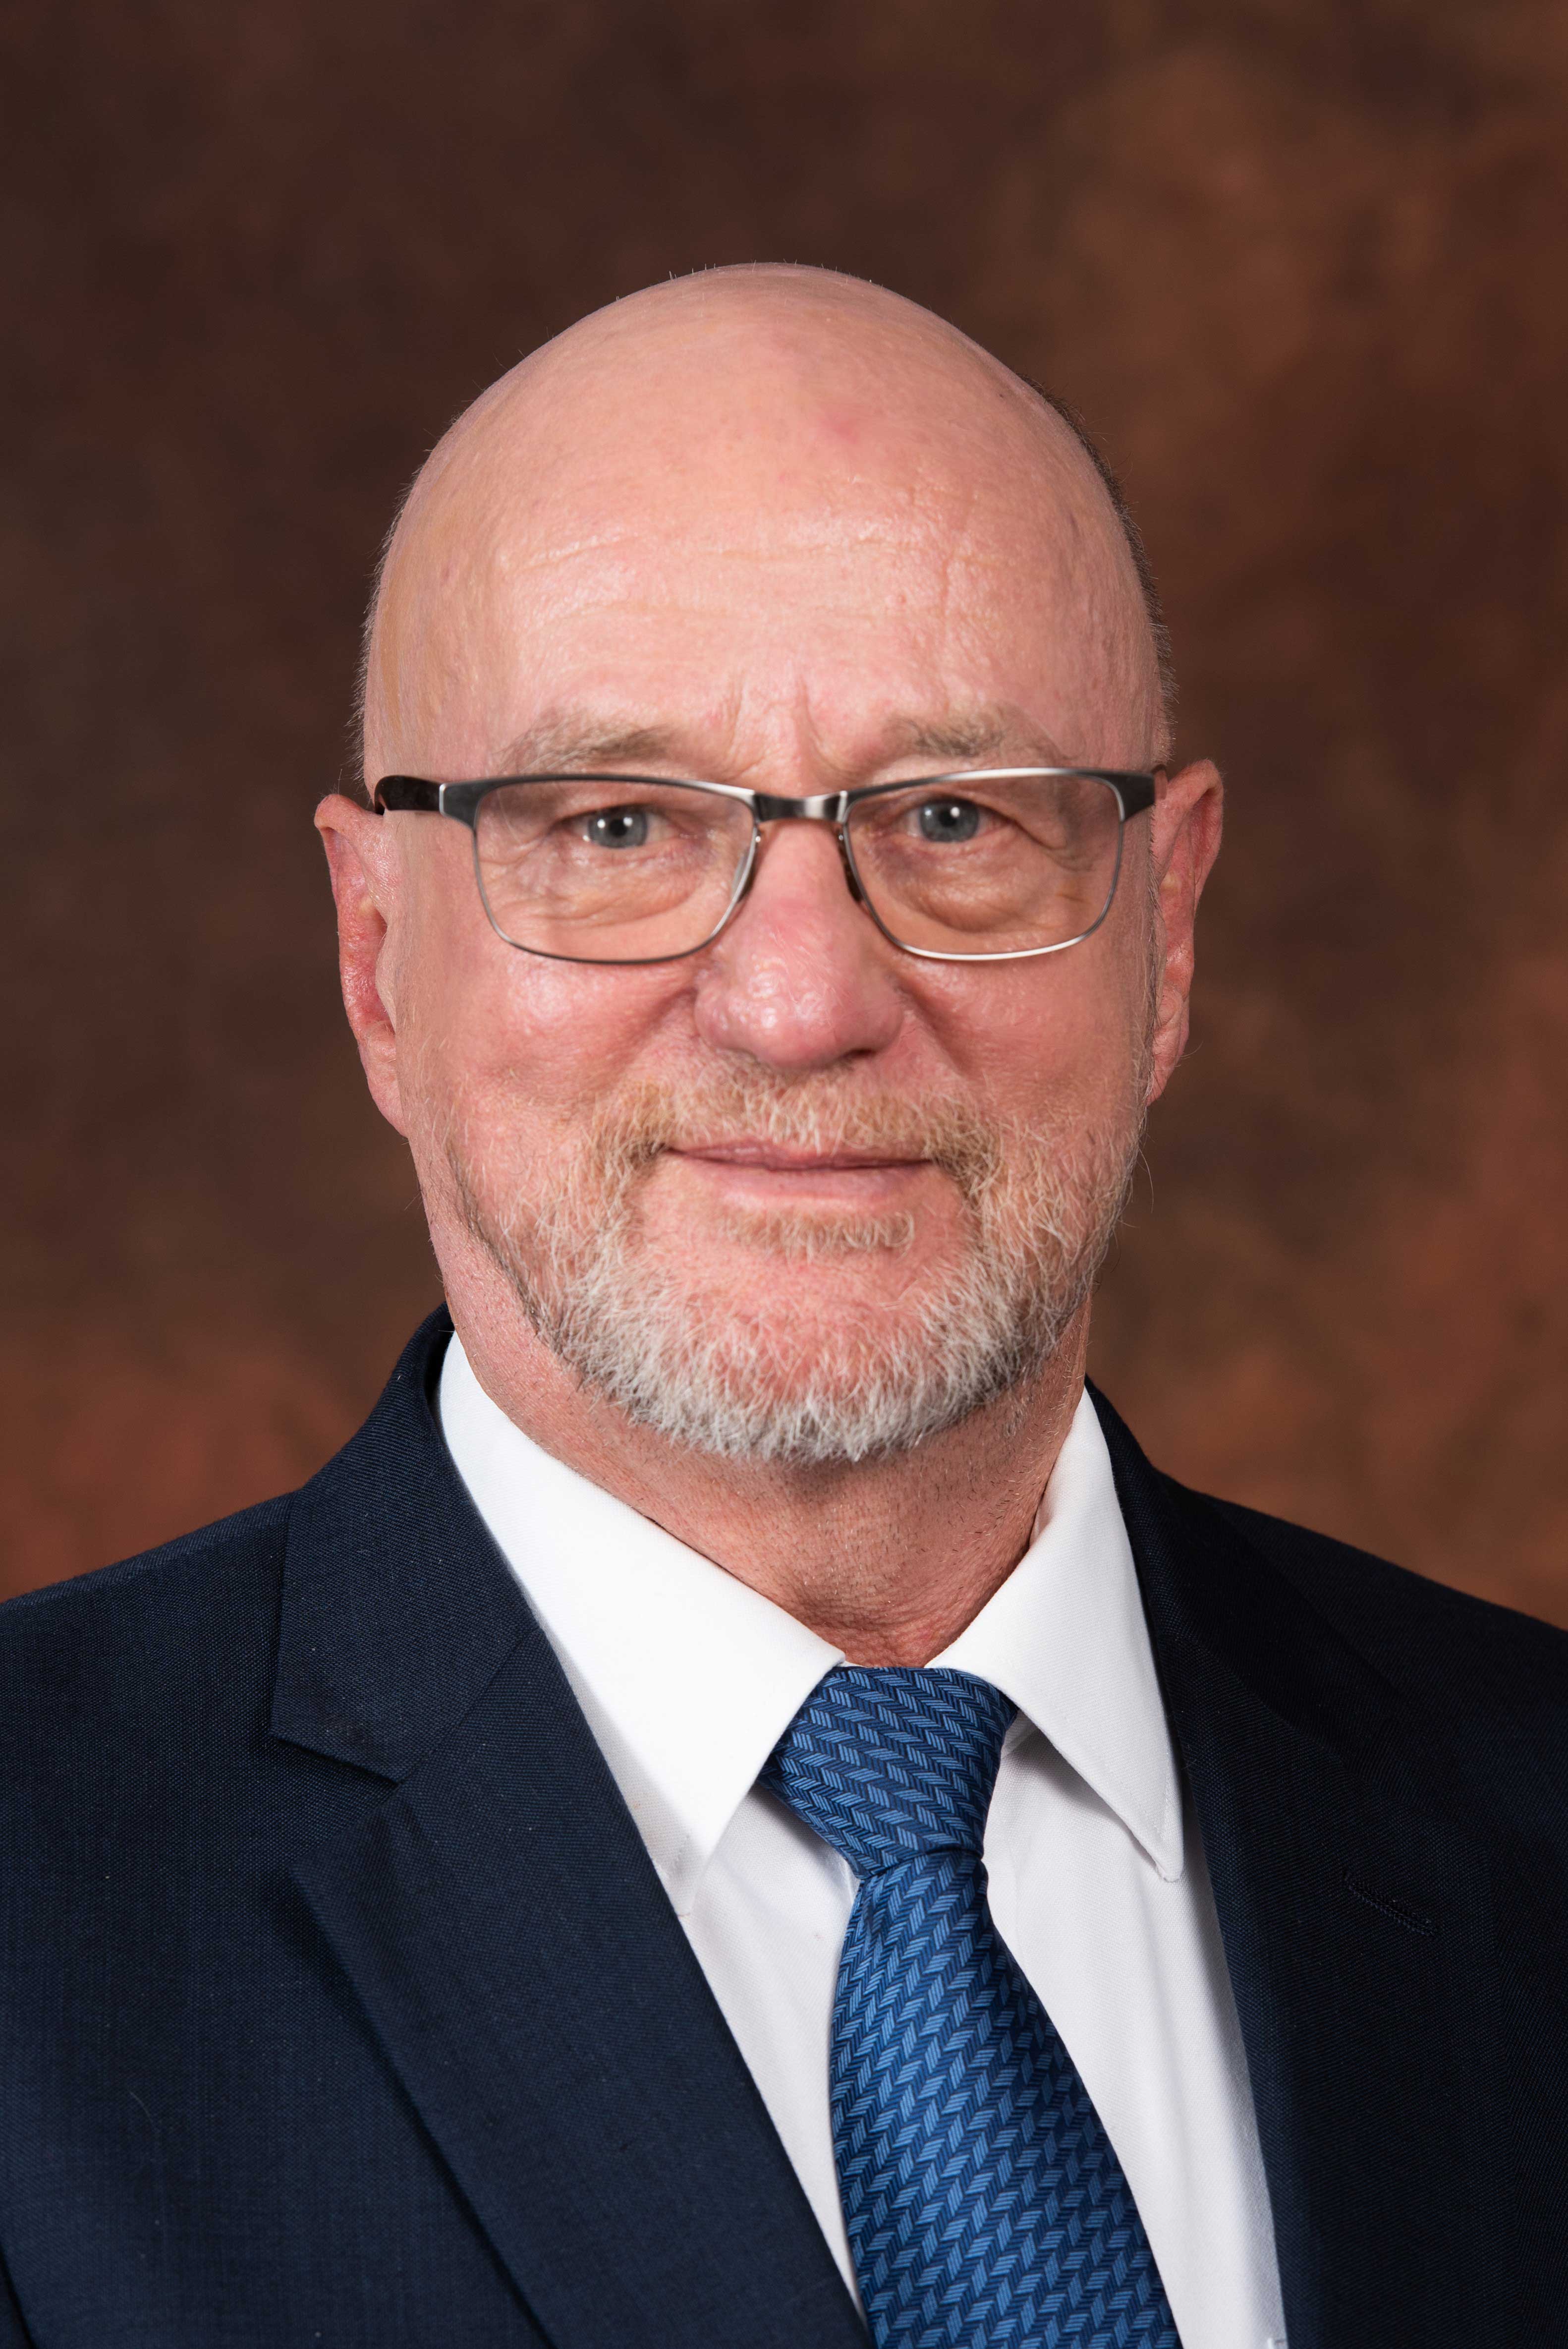 Minister Hanekom hosts Tourism Public Lecture at Walter Sisulu University in Mthatha